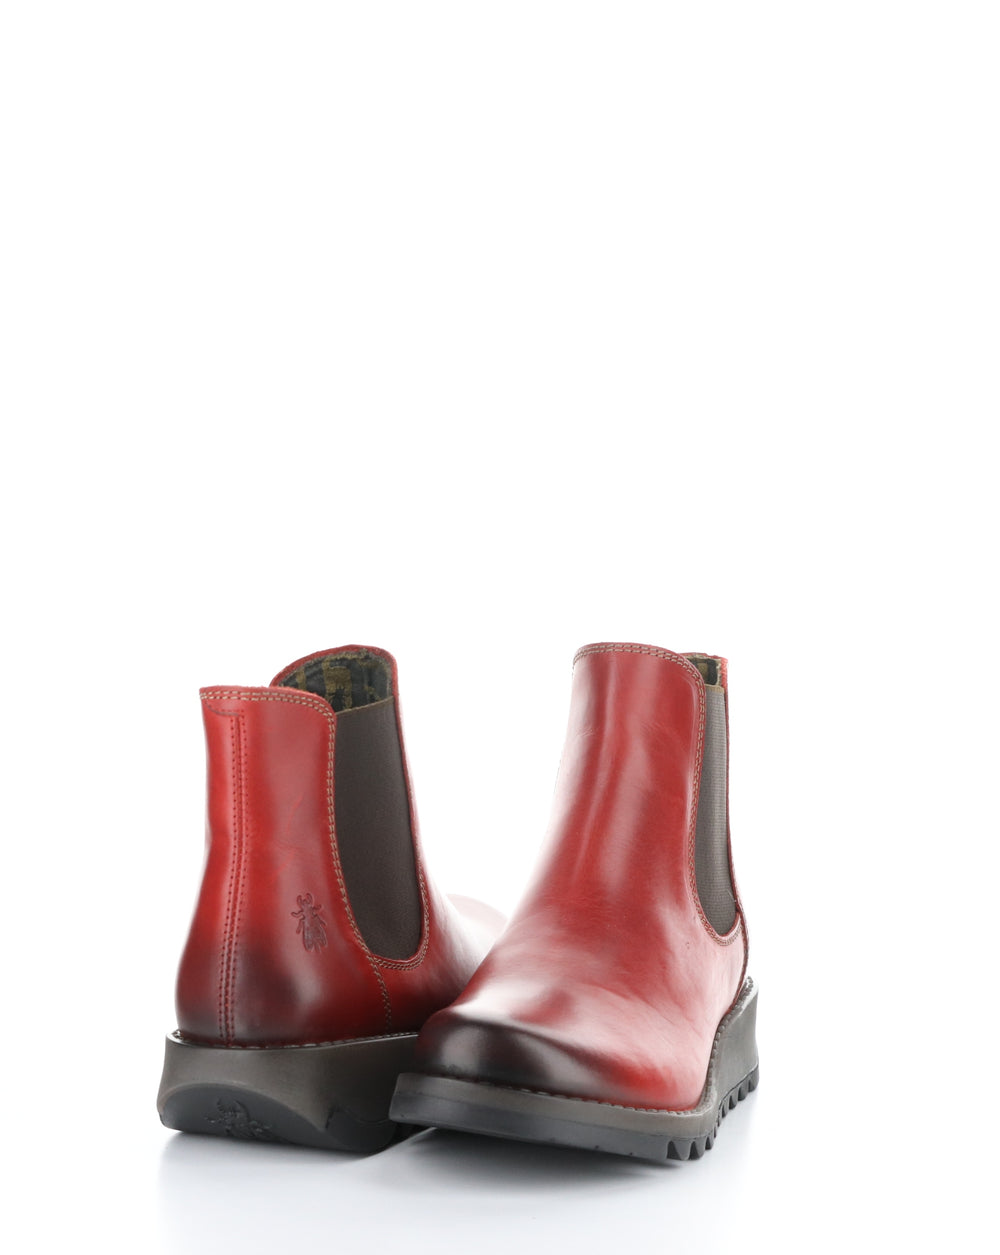 SALV 004 RED Elasticated Boots